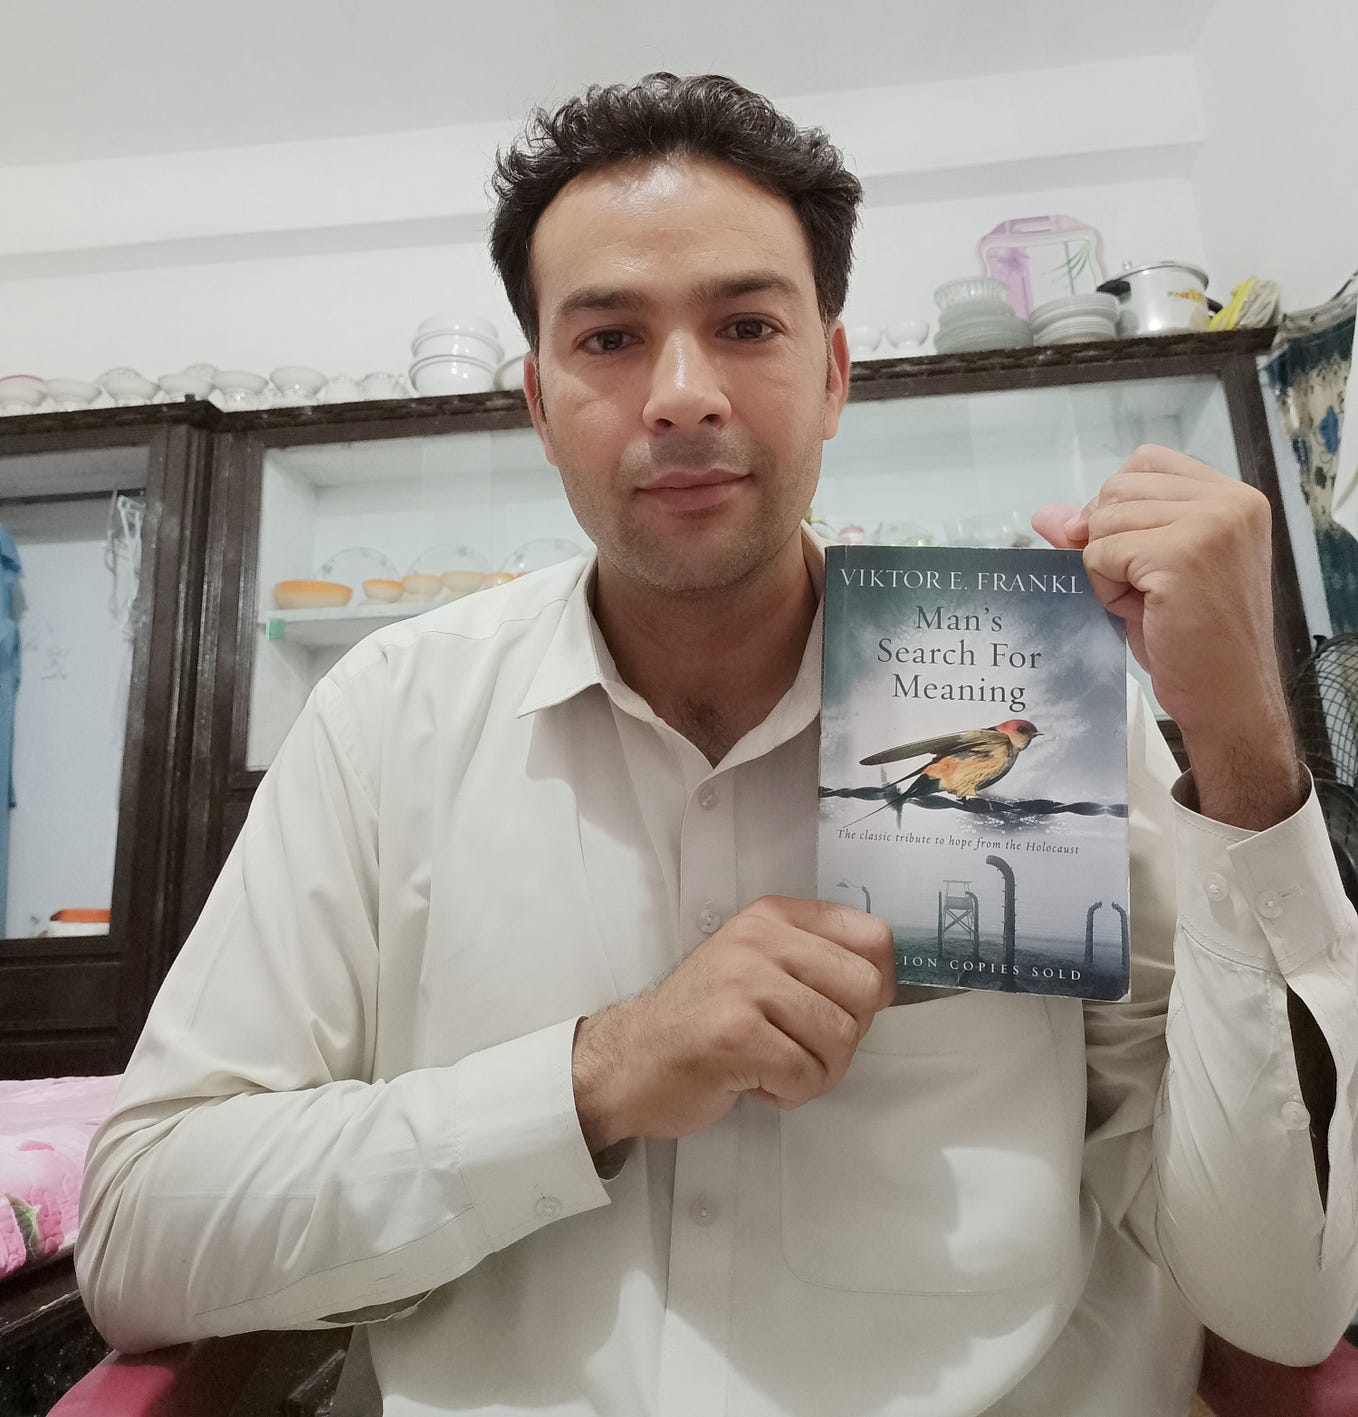 The Author is Holding the Book “Man’s Search For Meaning” in his hands